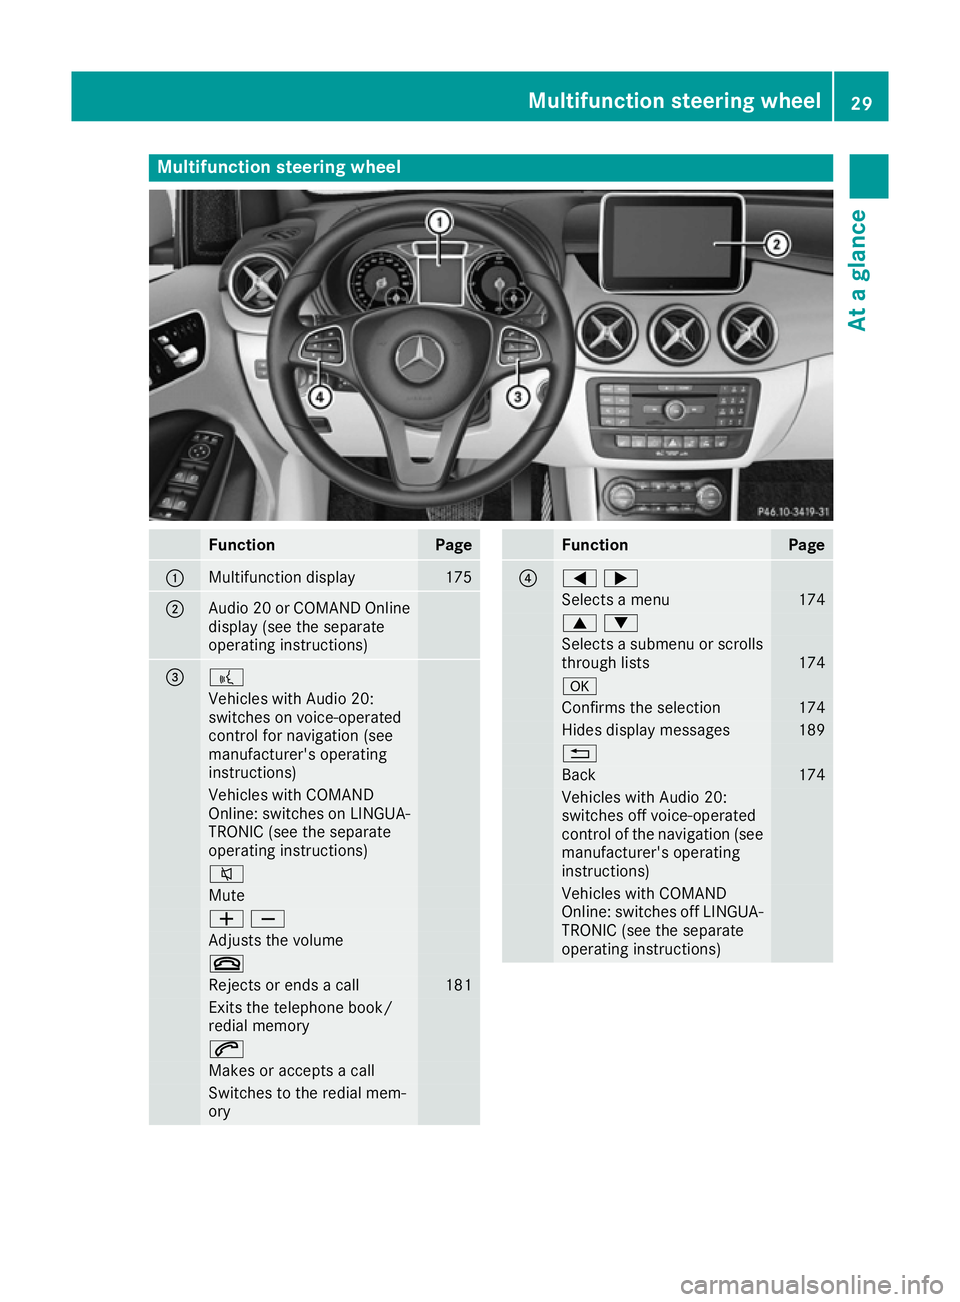 MERCEDES-BENZ B-CLASS HATCHBACK 2015  Owners Manual Multifunction steering wheel
Function Page
:
Multifunction display 175
;
Audio 20 or COMAND Online
display (see the separate
operating instructions) = ?
Vehicles with Audio 20:
switches on voice-opera